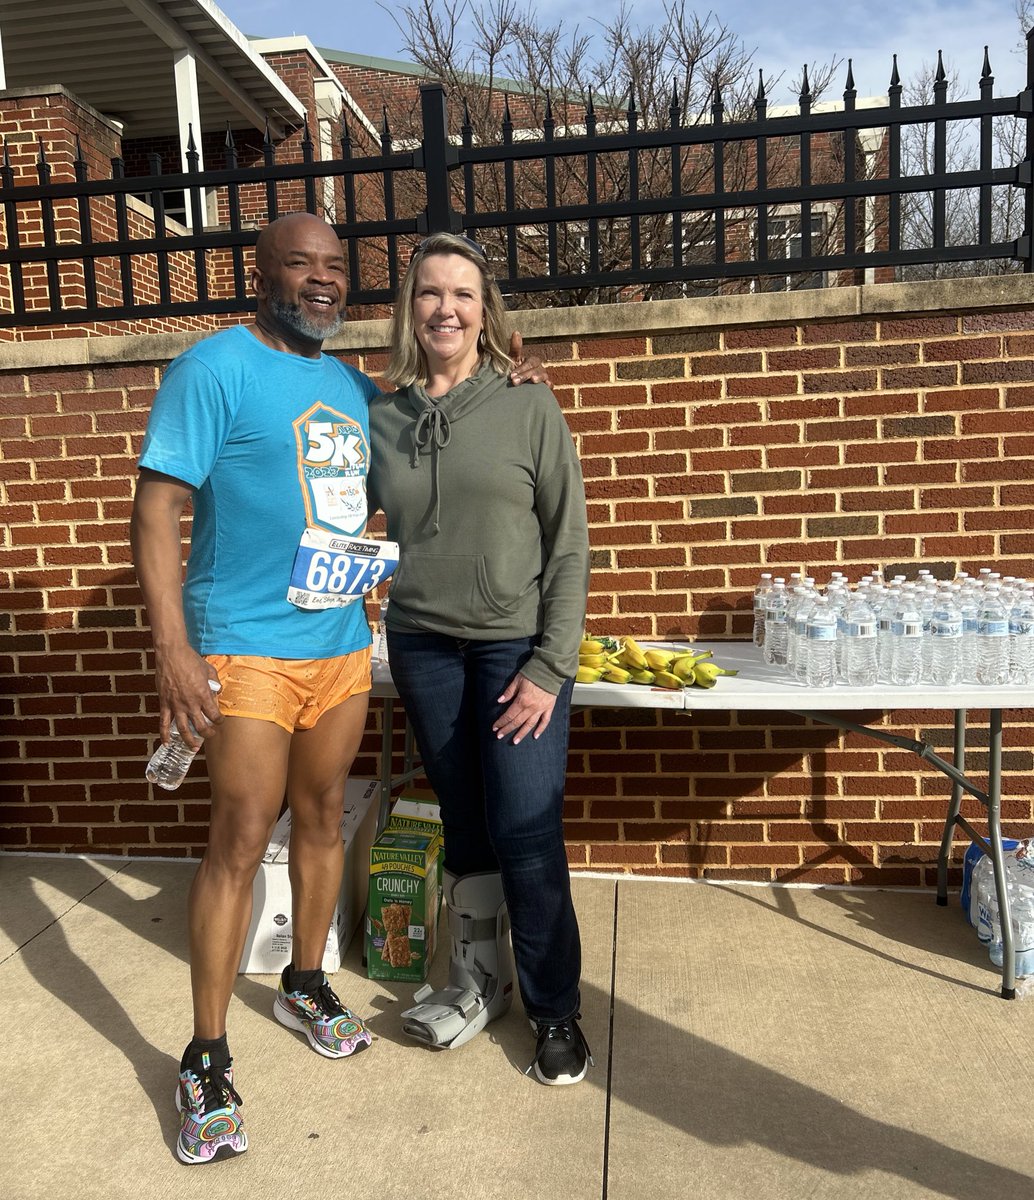 No better way to start a Saturday than with a 5K! Fun times at the APS CTAE 5K…smiles & miles! 😁😊 Thanks to @ardensgardenatl for providing healthy fuel for the runners @apsupdate @georgiactae